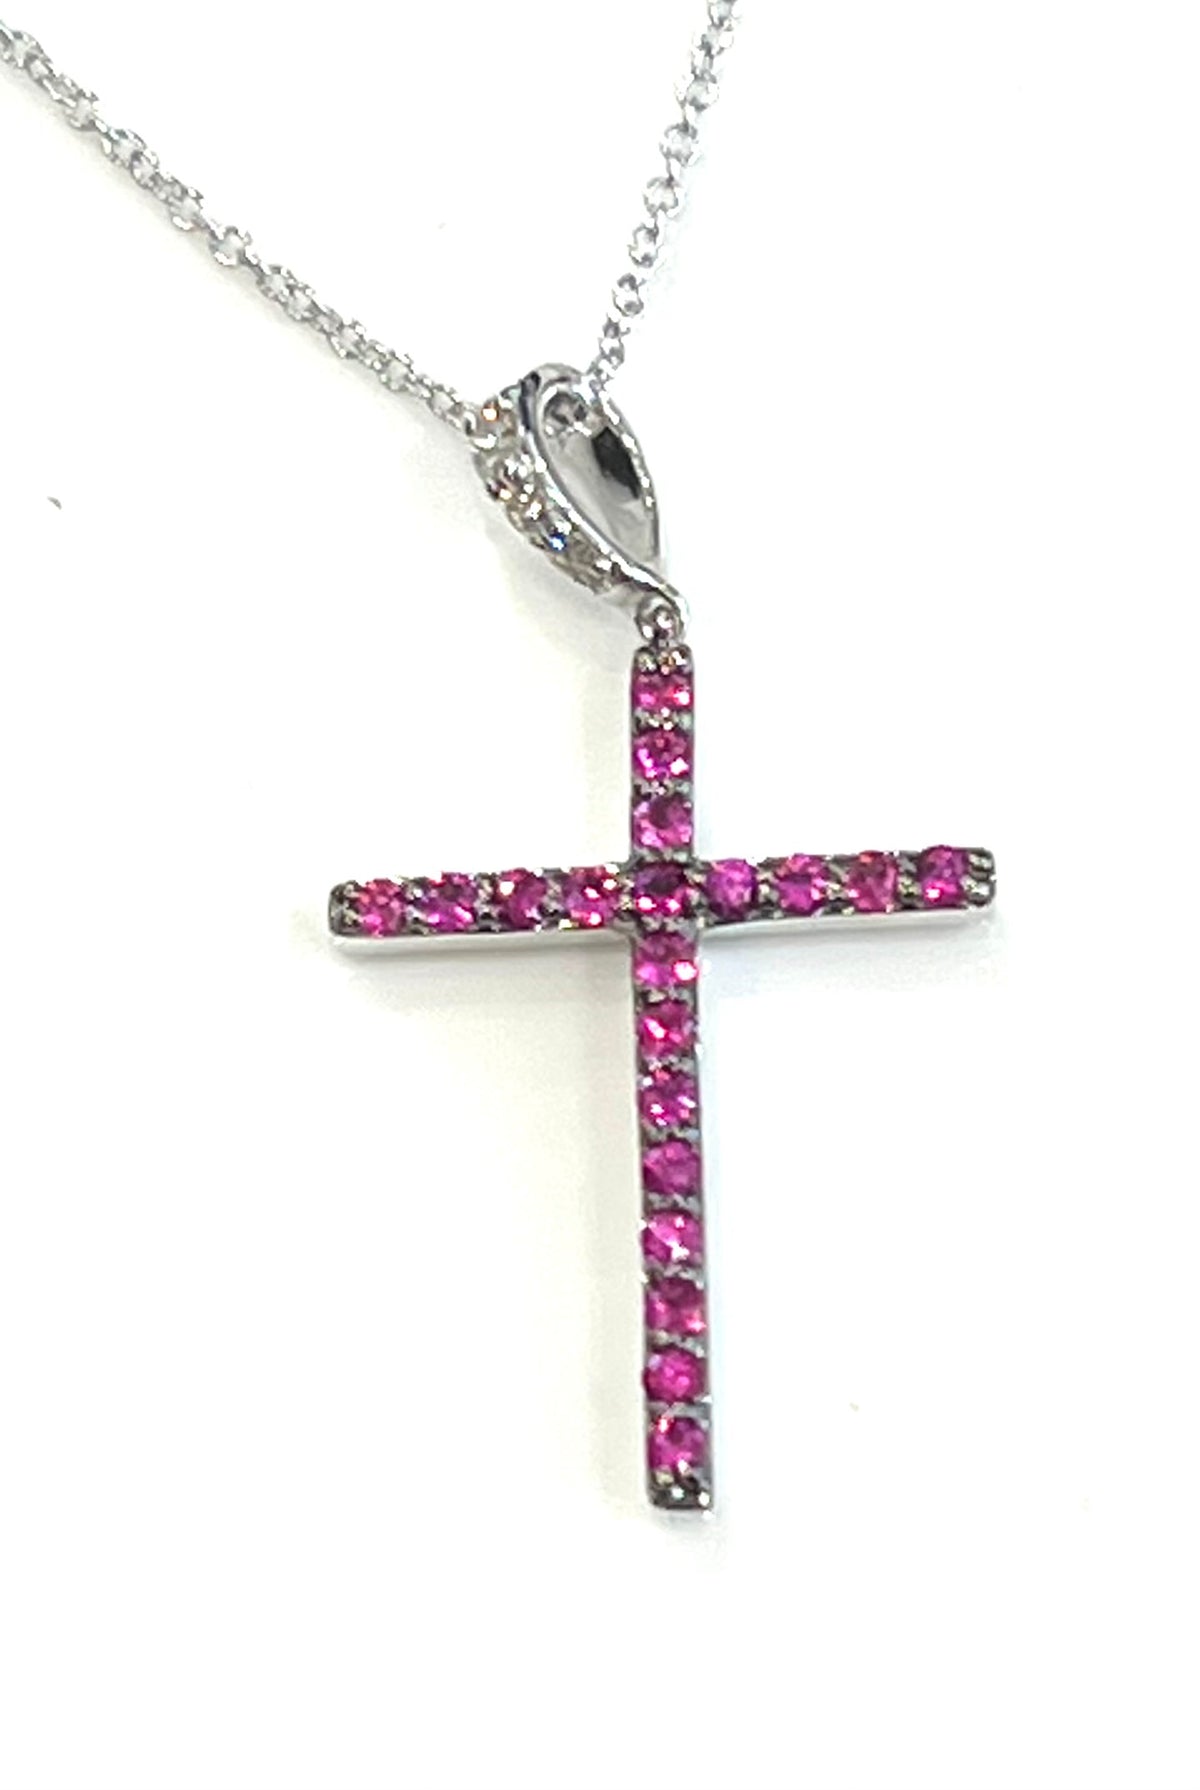 10K White Gold 0.20cttw Ruby and 0.03cttw Diamond Cross Pendant - 18 inches